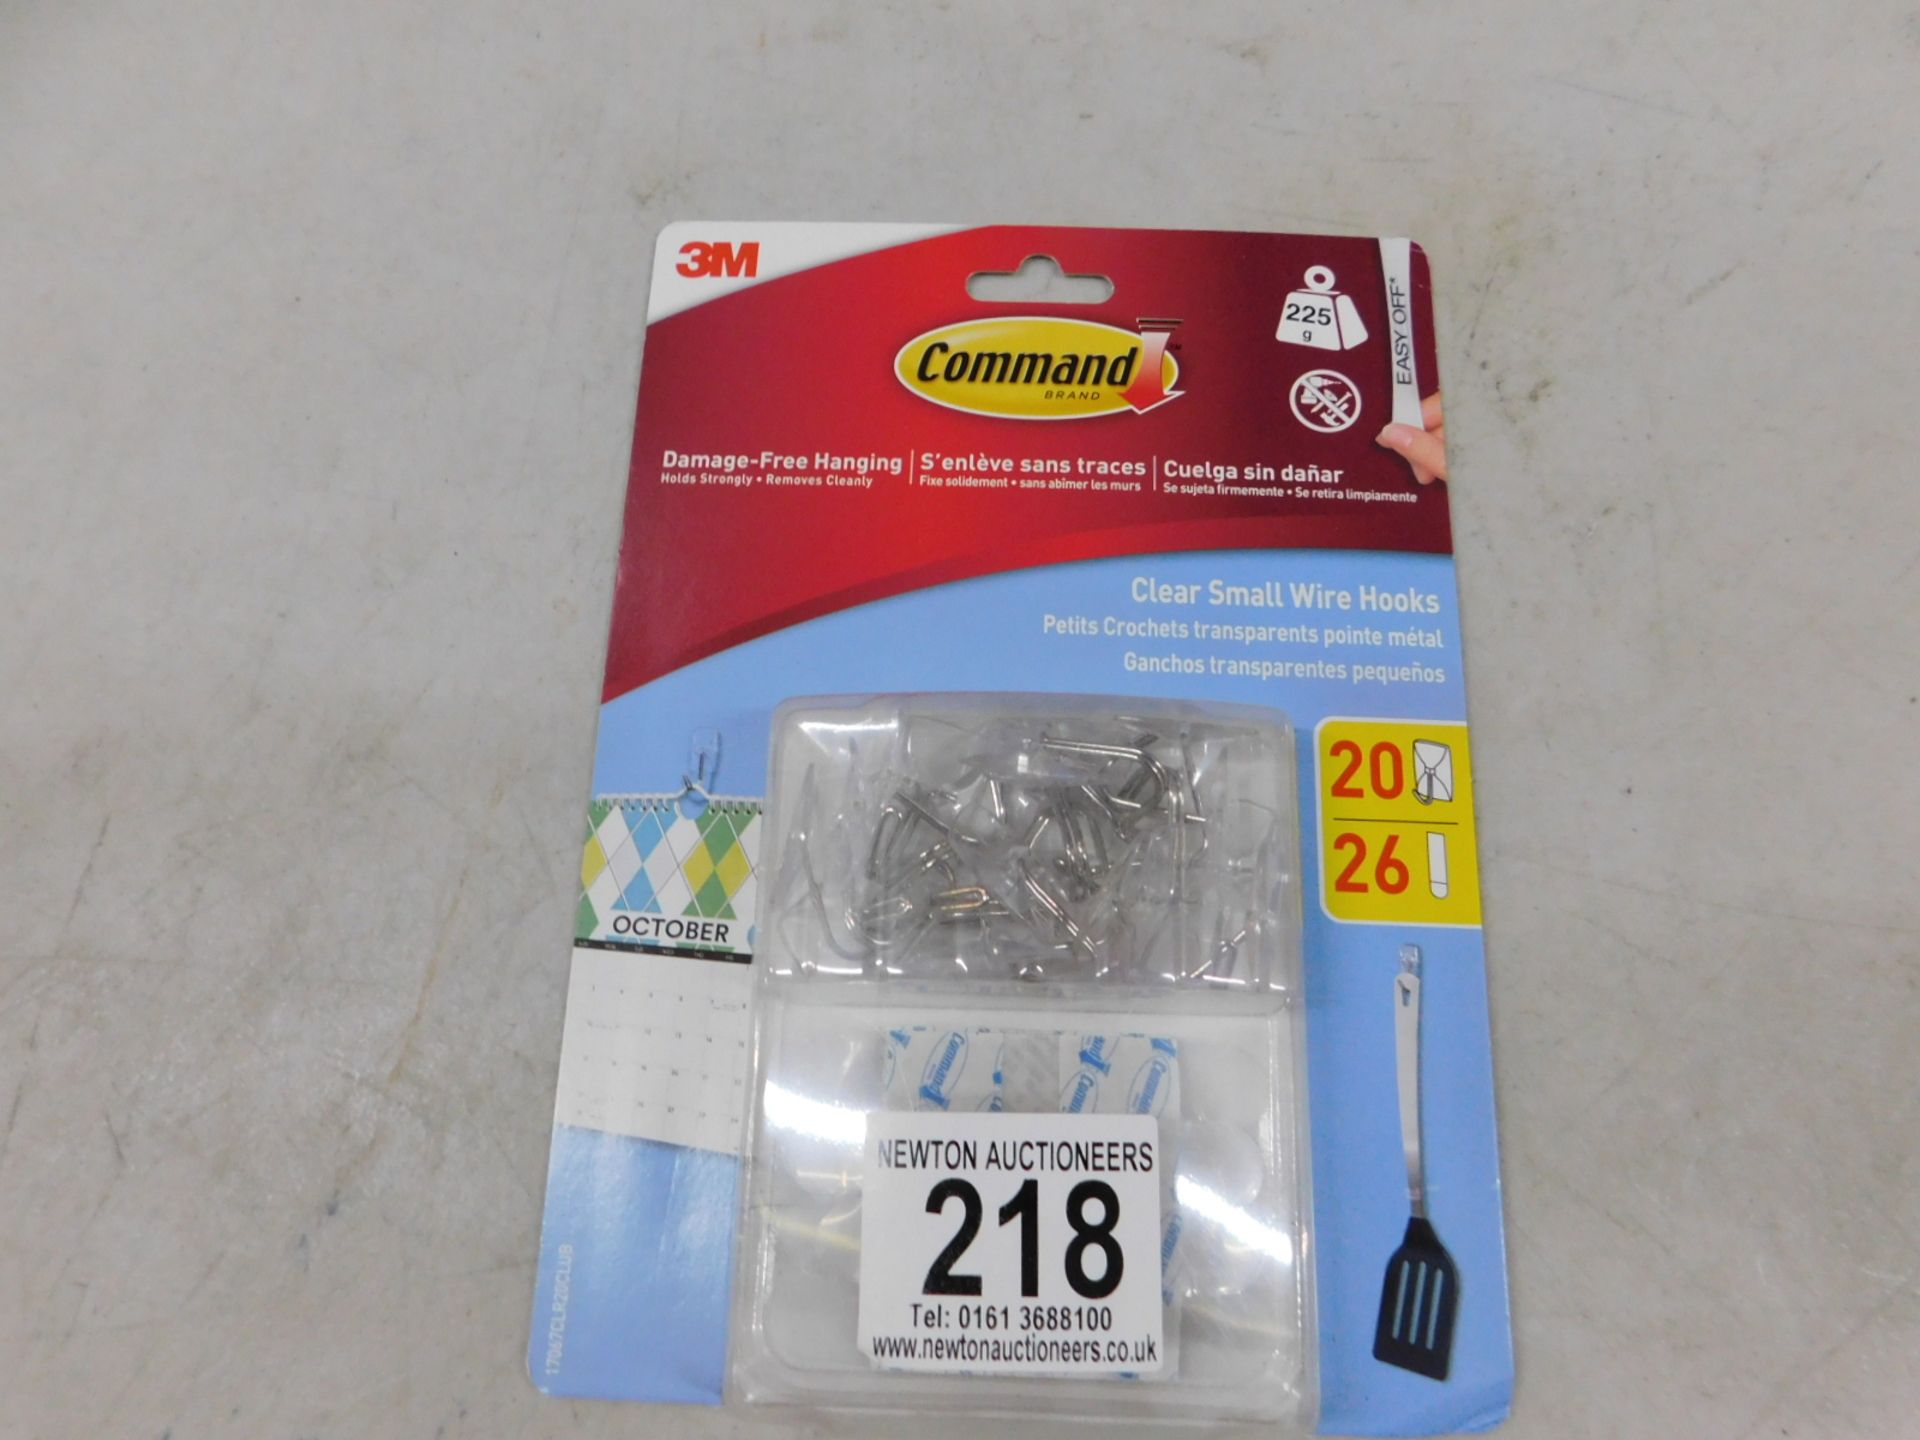 1 PACK OF COMMAND BRAND DAMAGE-FREE HANGING CLIPS RRP Â£12.99